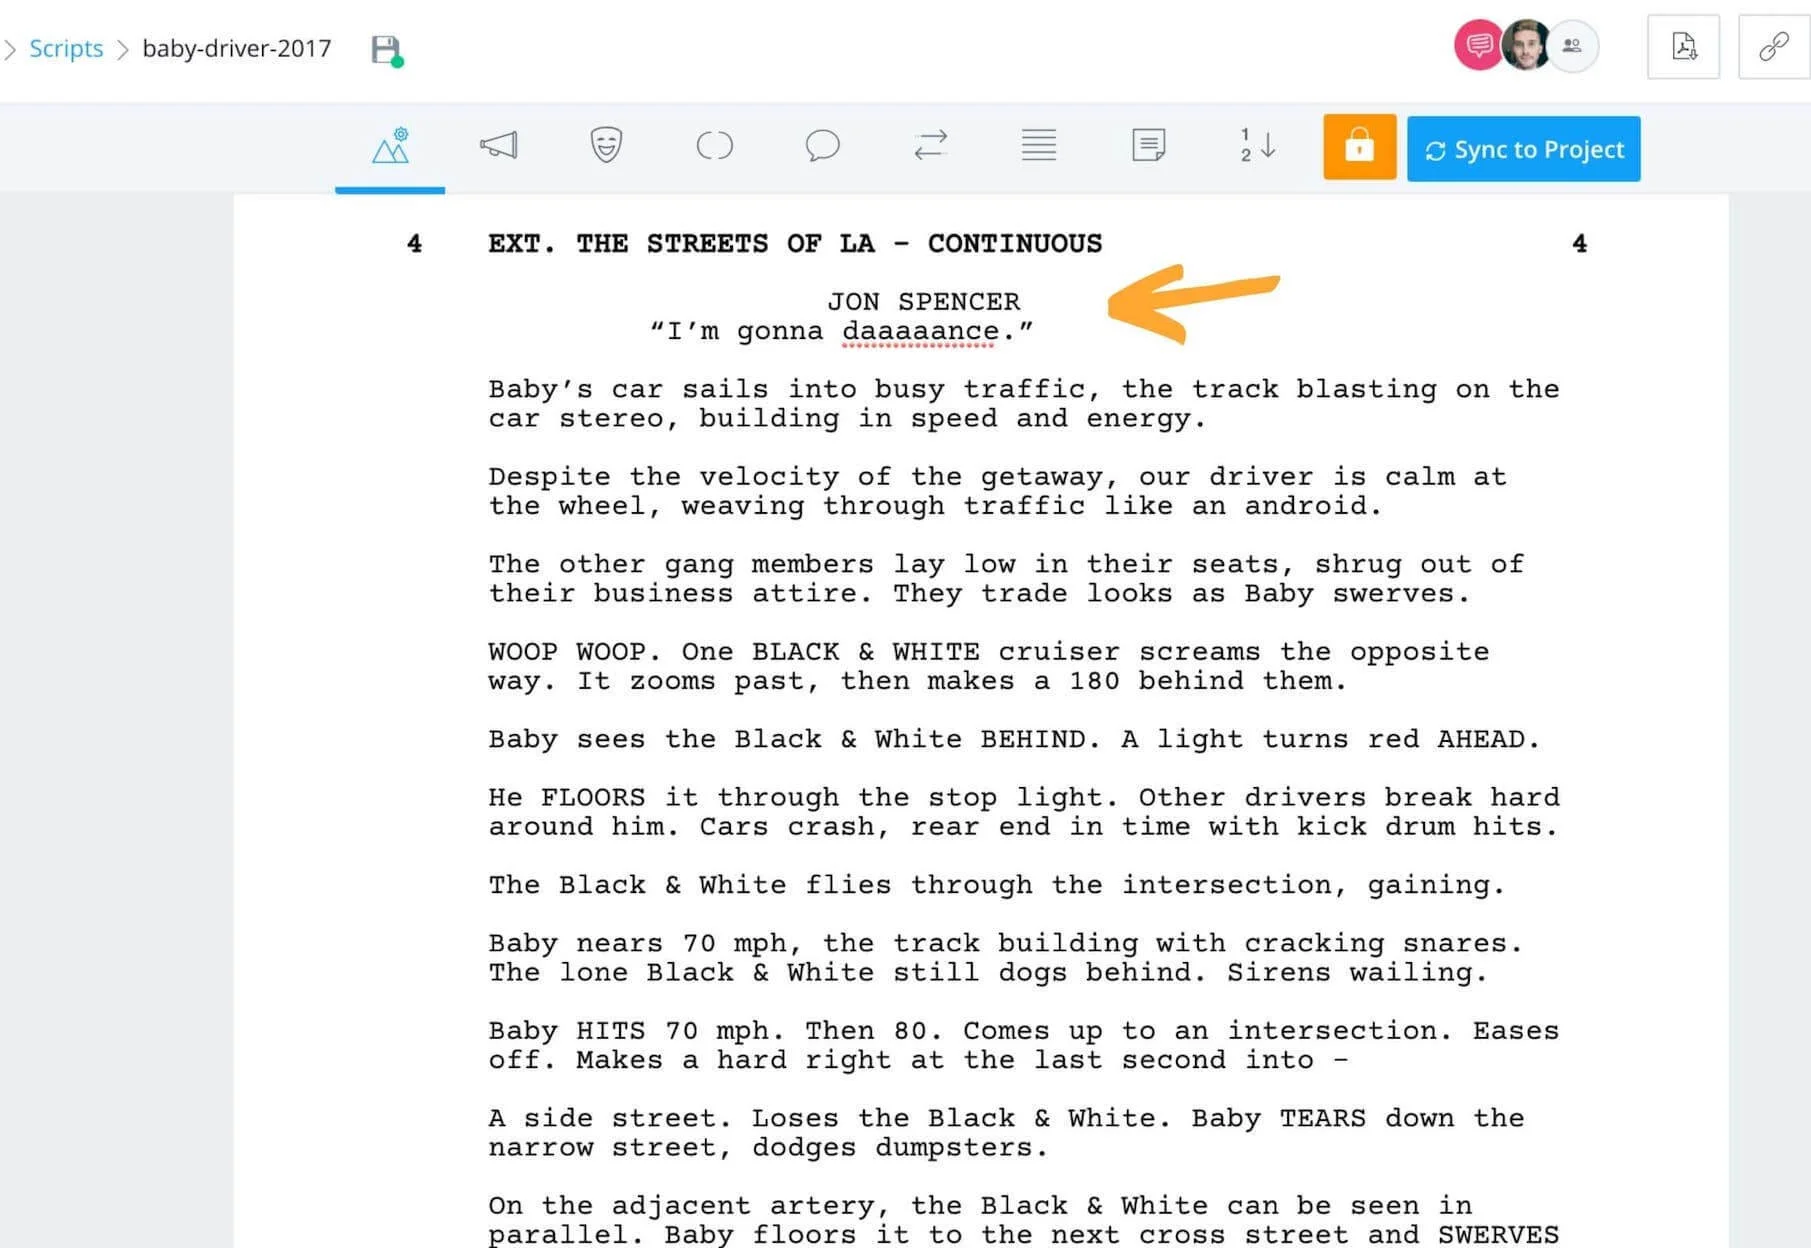 How to Write a Car Chase Scene in a Screenplay [with Examples]